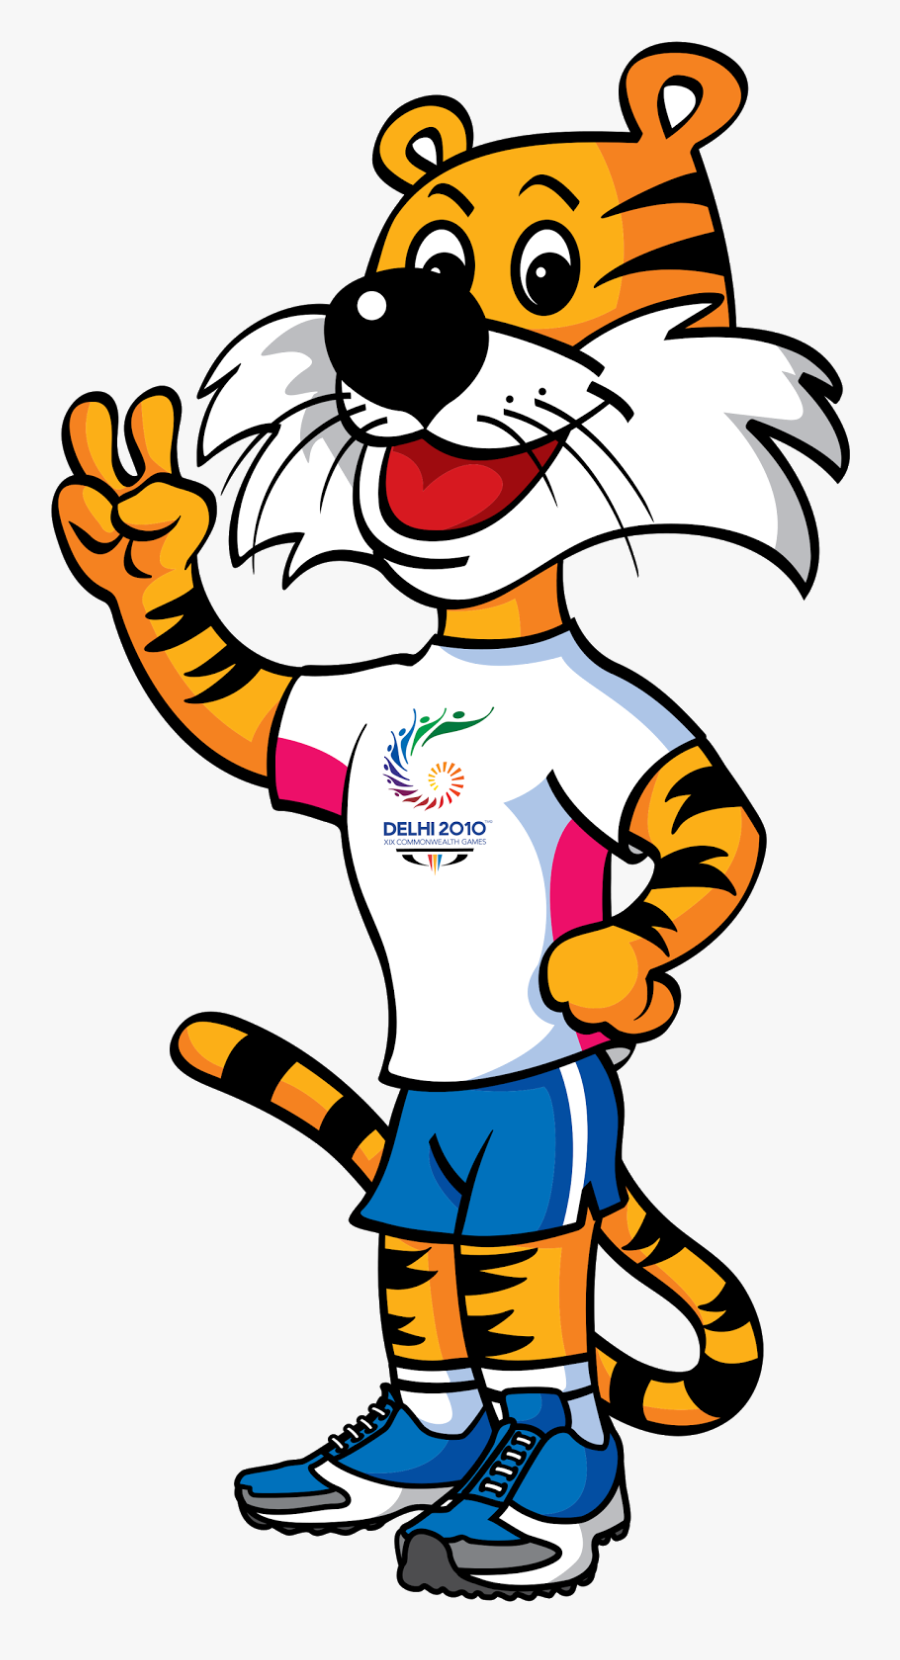 Commonwealth Games 2010 Shera Clipart , Png Download - 2010 Commonwealth Games Shera, Transparent Clipart